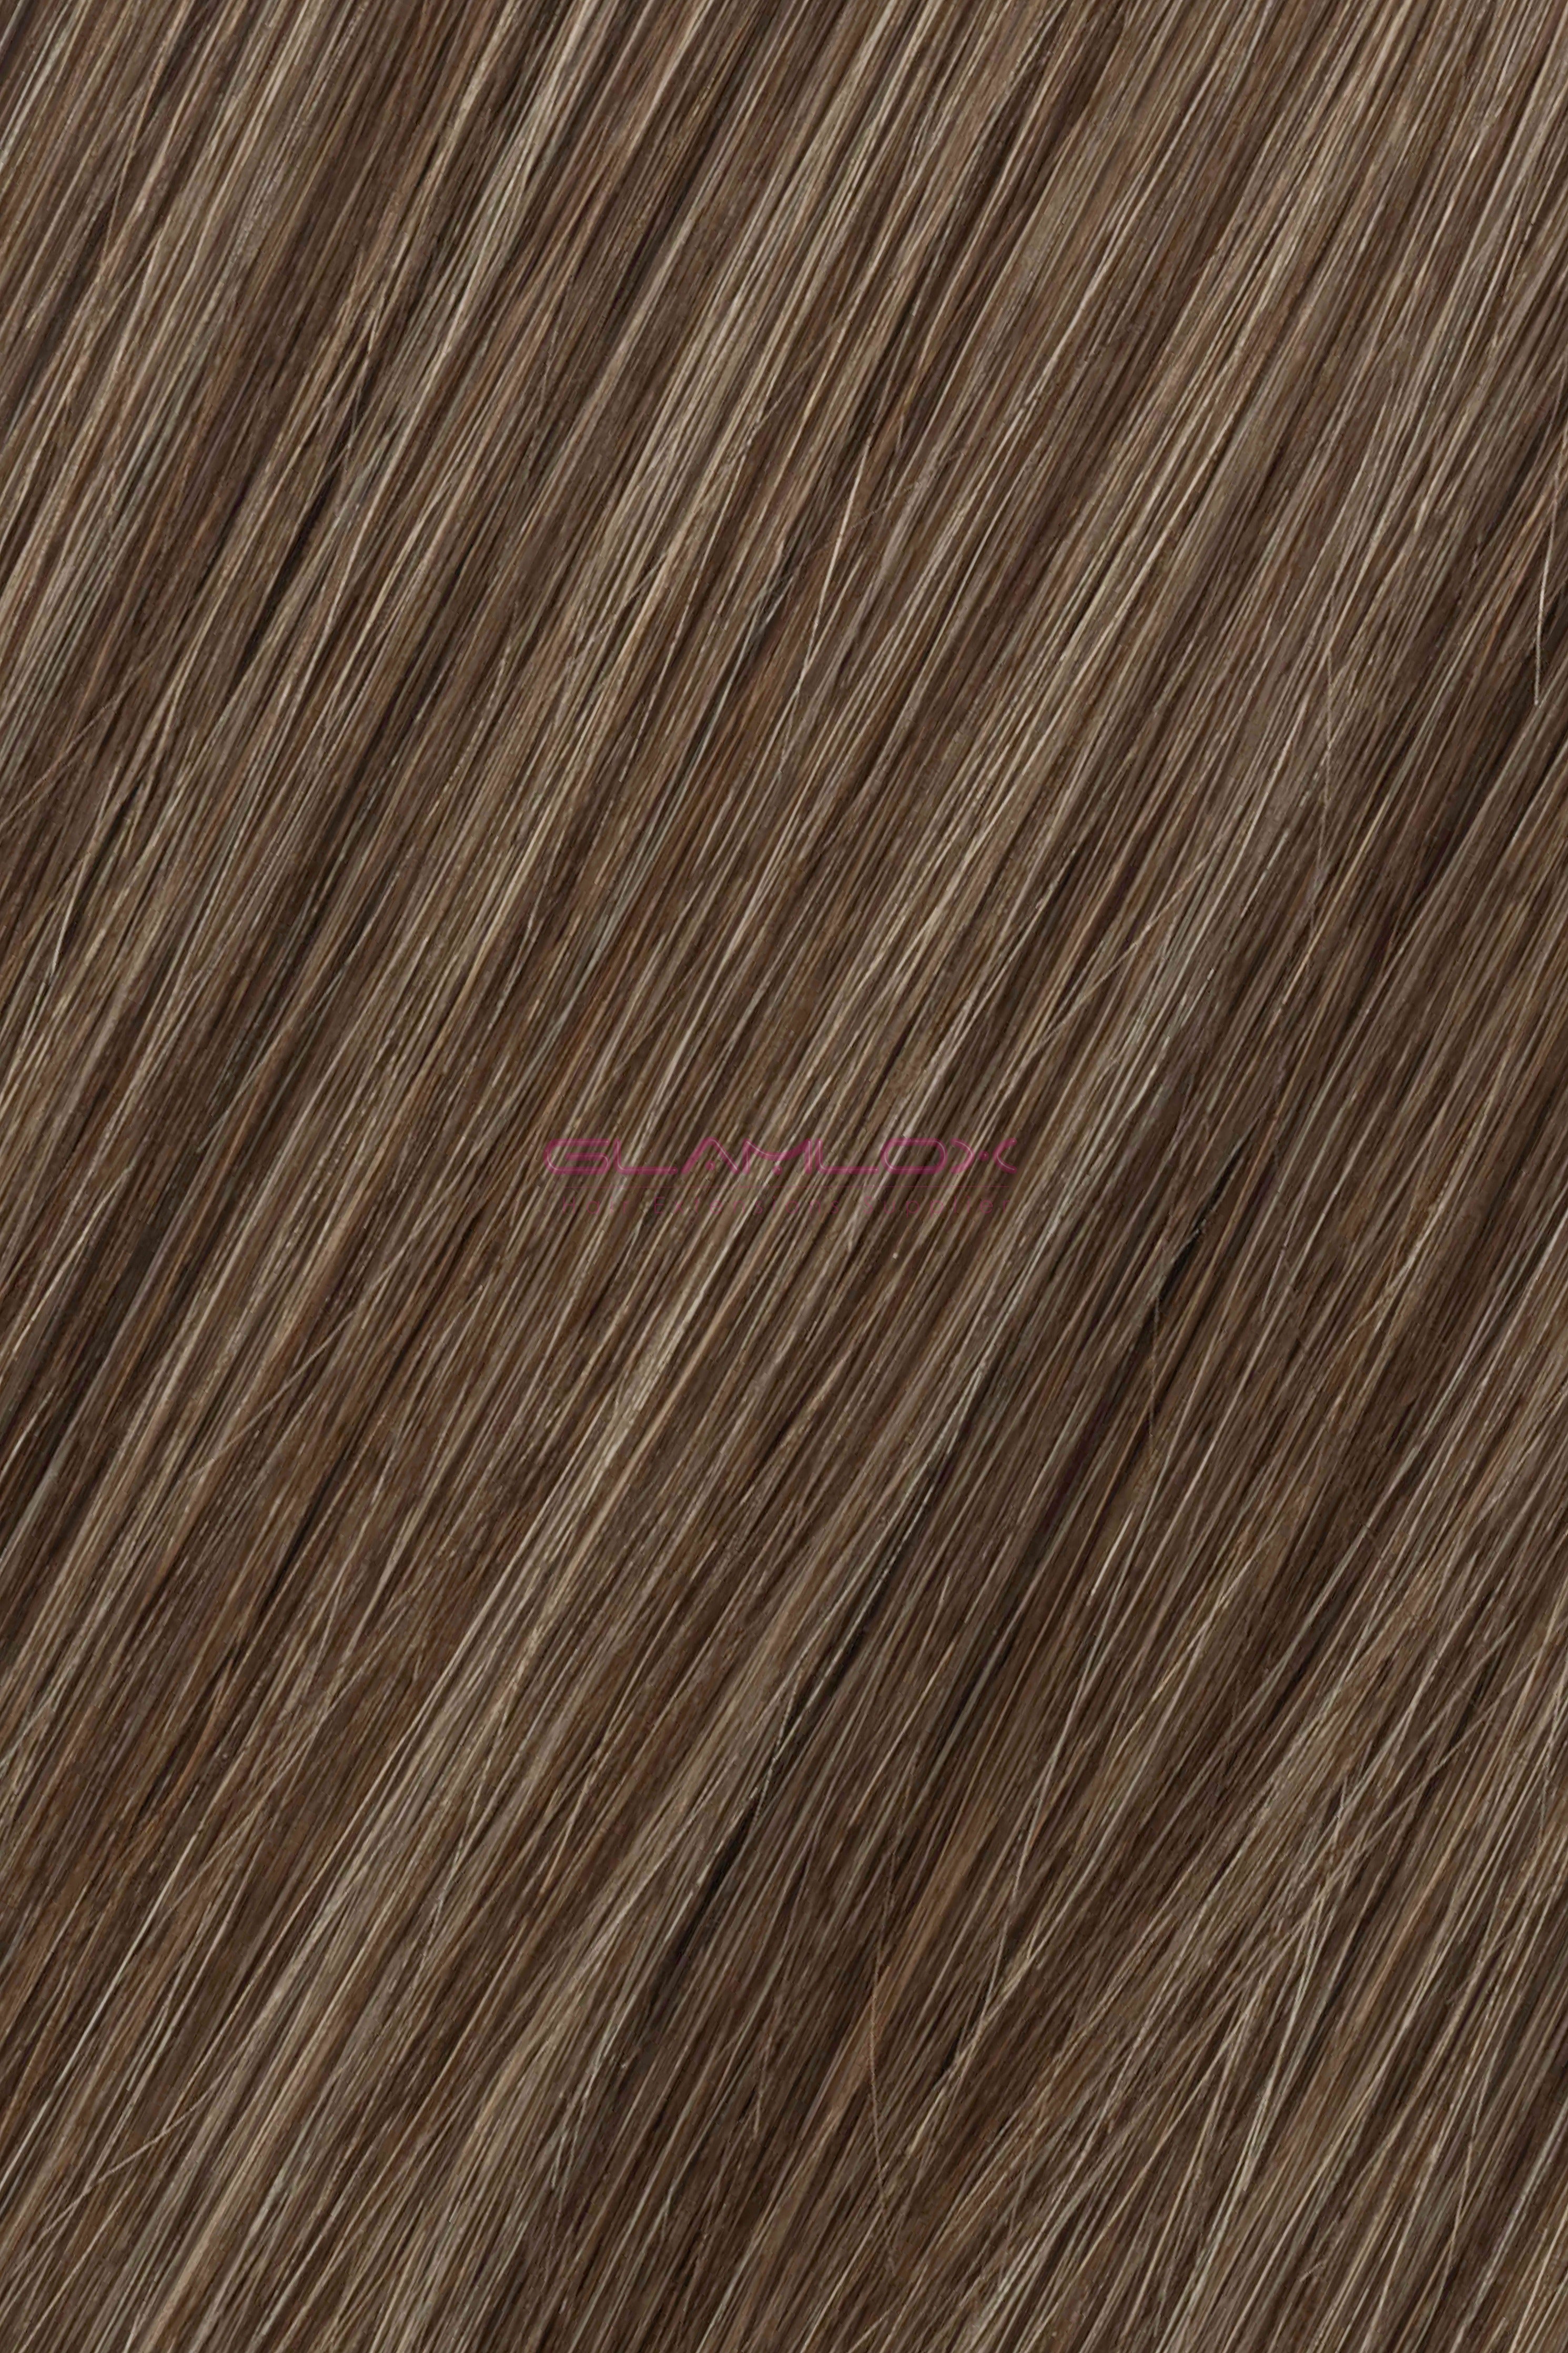 20/22" - Tape In Hair Extensions - Russian Mongolian Double Drawn Remy Human Hair Extensions